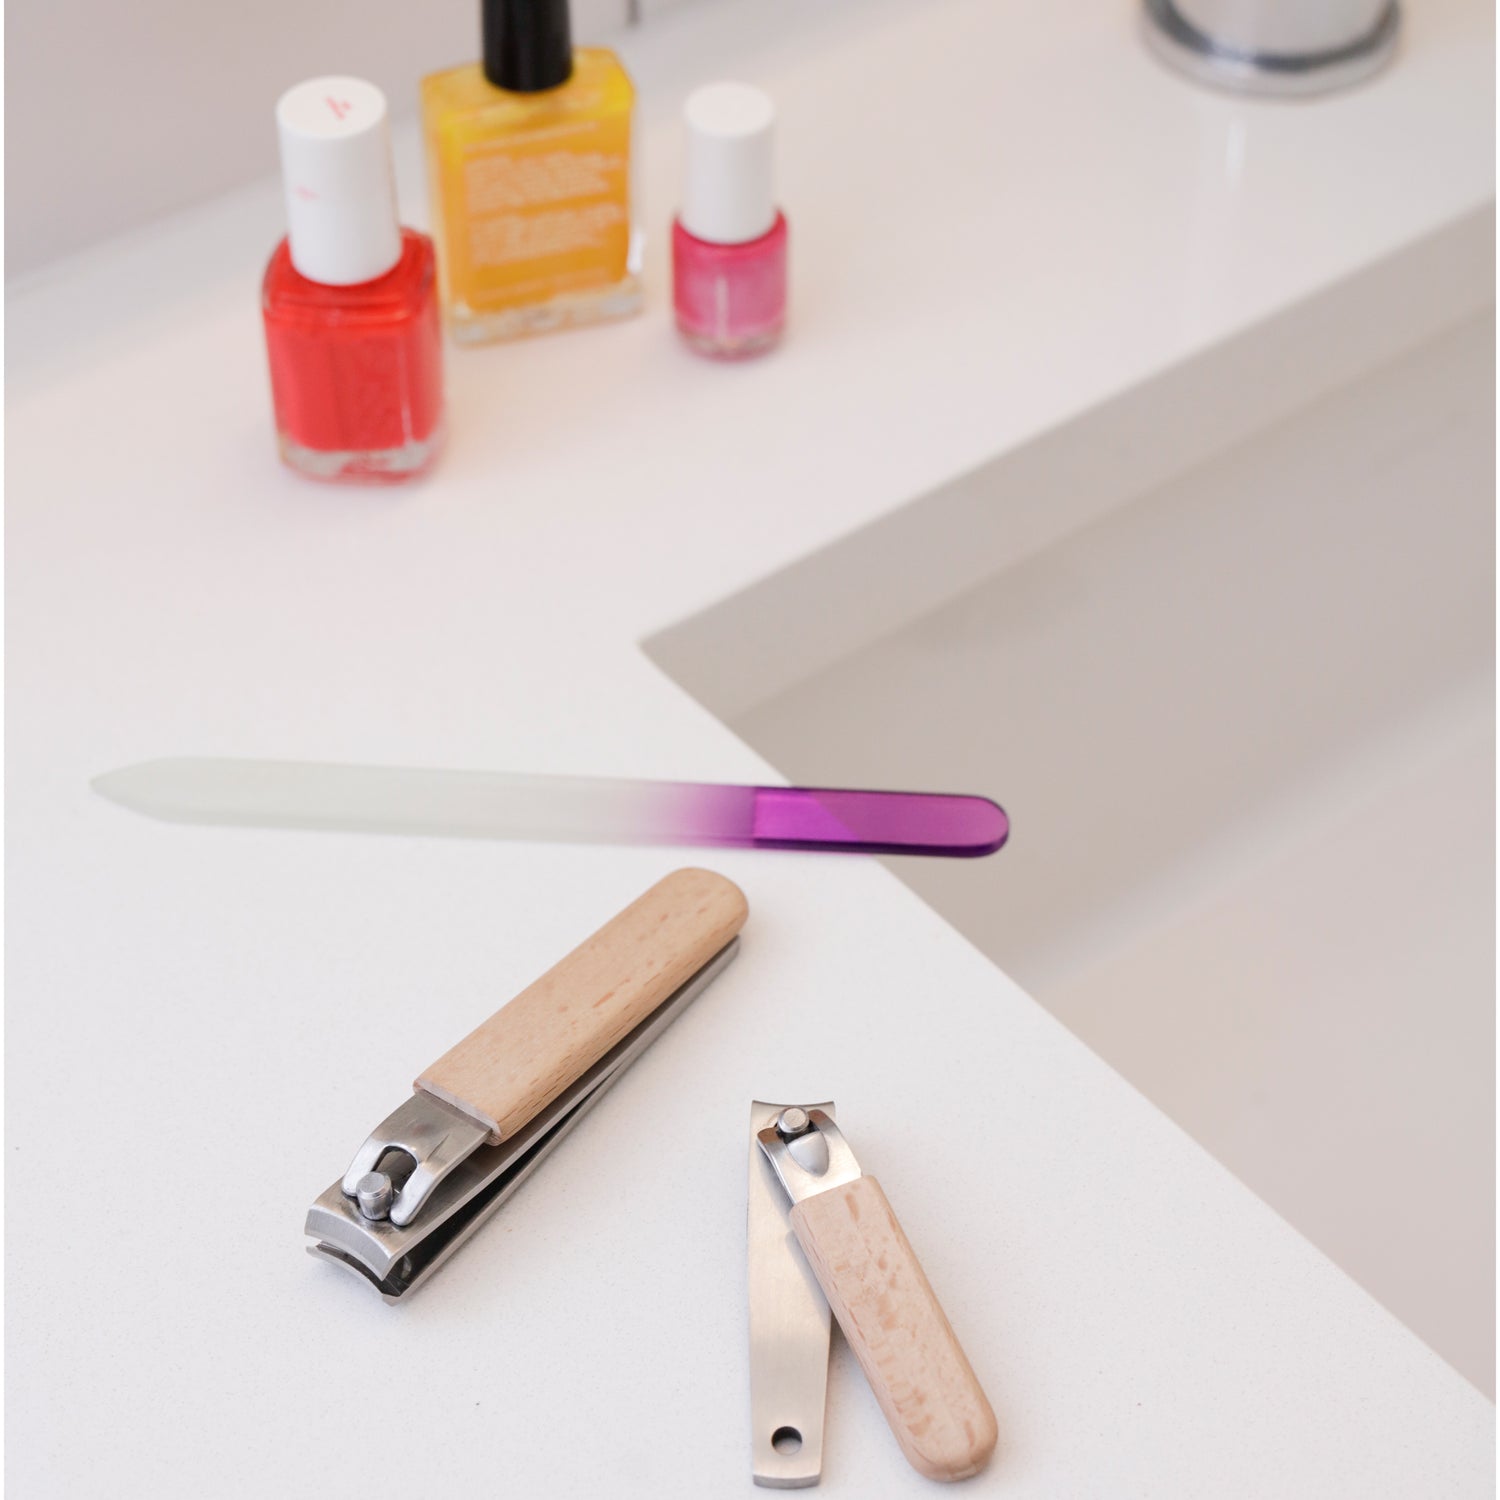 One Hand Nail Clipper Kits with Suction Cup Feet